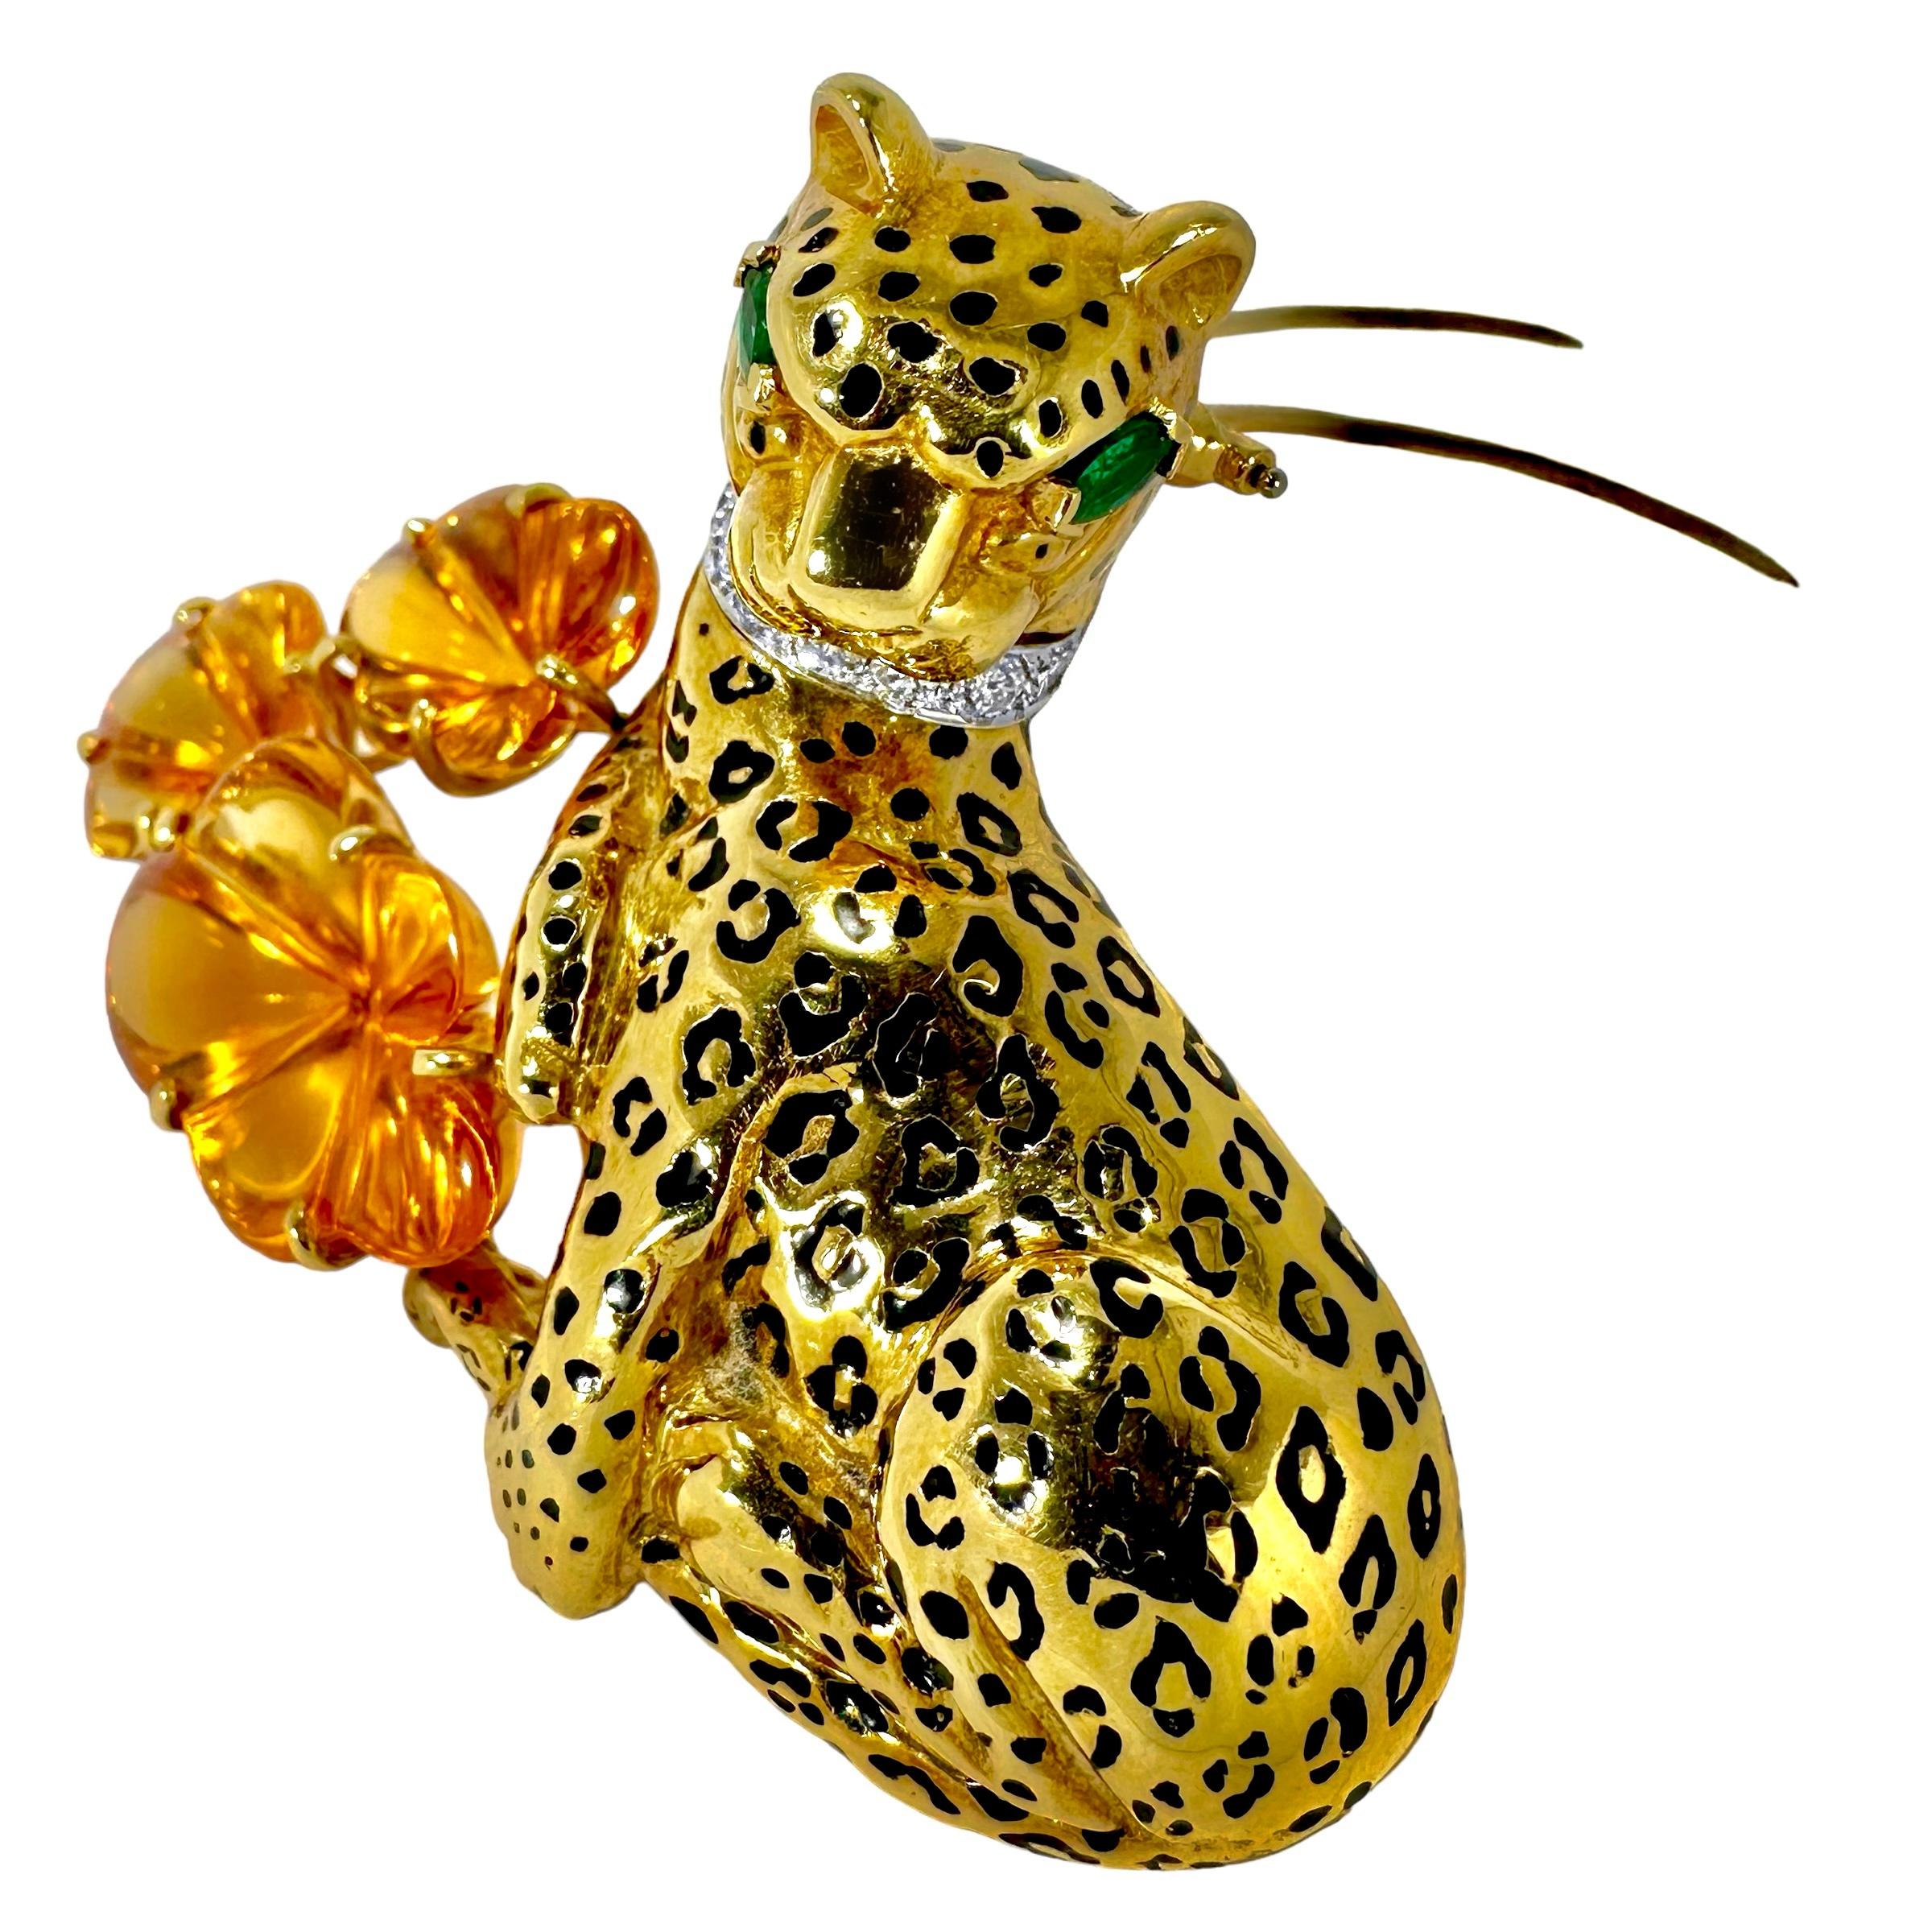 This very artistic and deftly crafted leopard, resting on a bed of golden flowers, is truly high art in every sense. The very lifelike creature is fashioned in 18k yellow gold with black enamel spots, lush green emerald eyes, and a diamond collar.